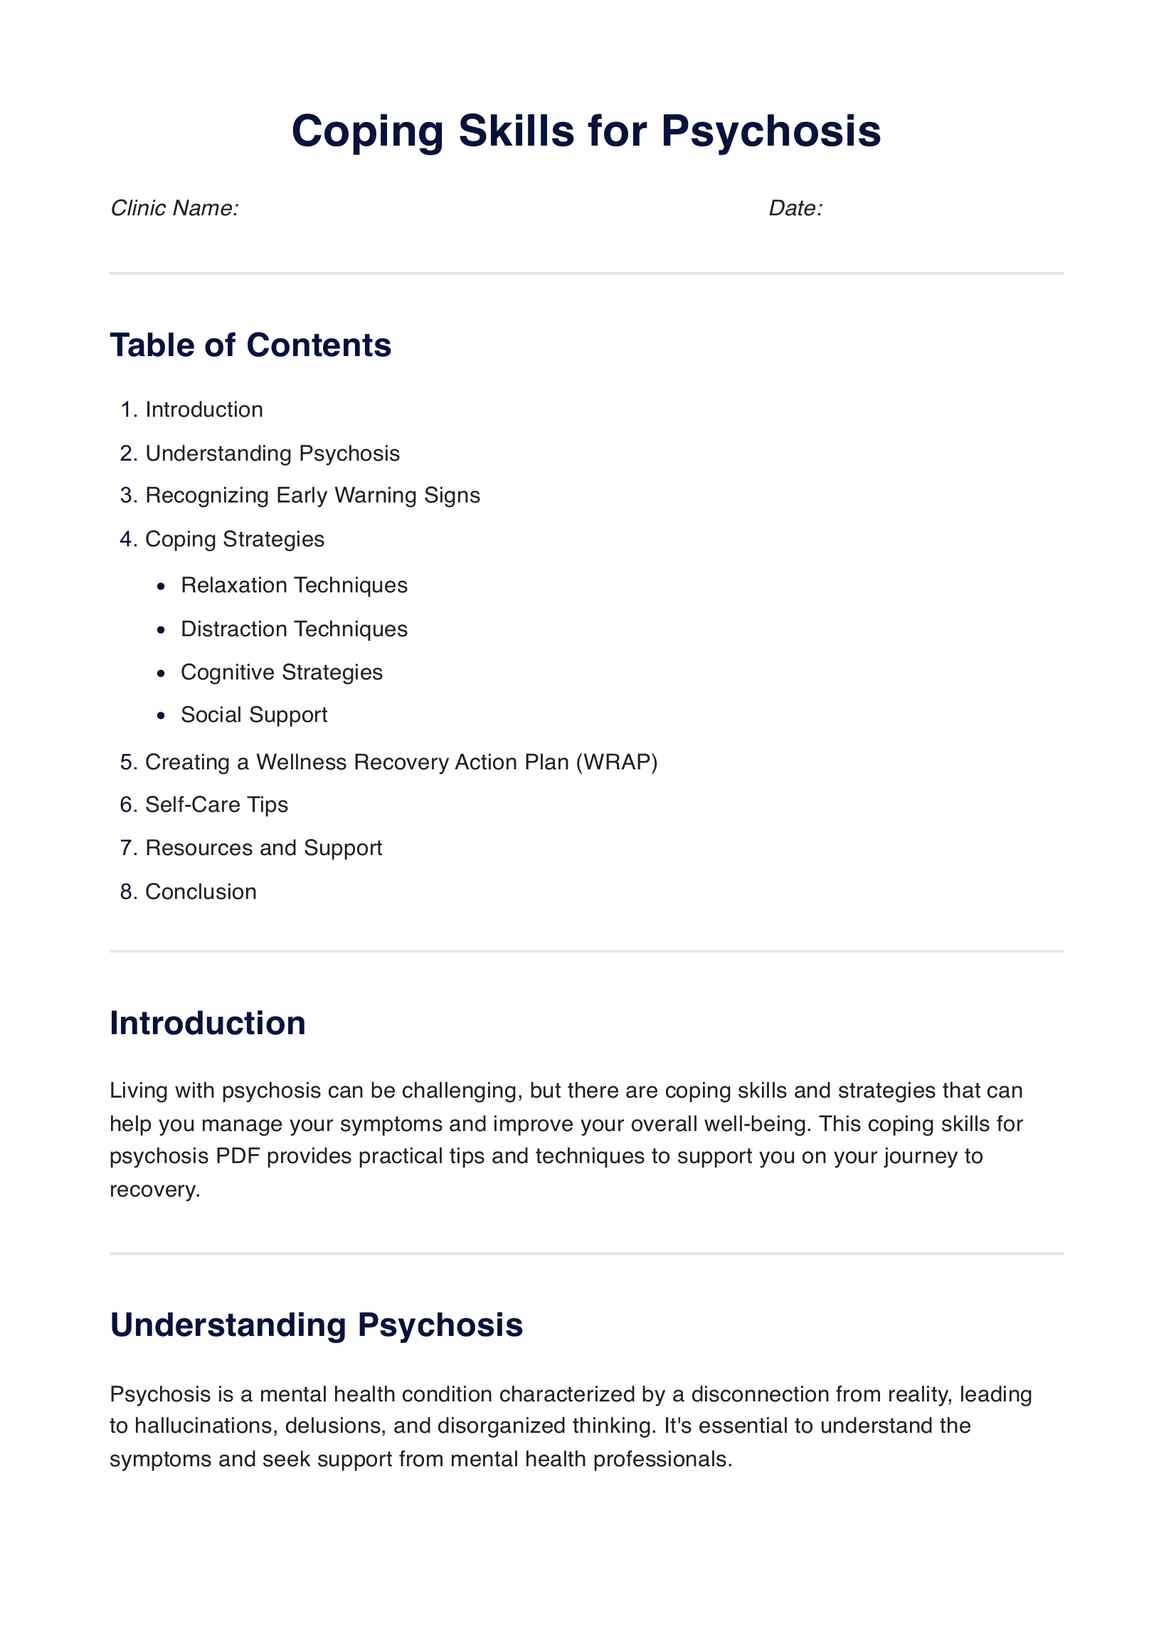 Coping Skills for Psychosis PDF PDF Example